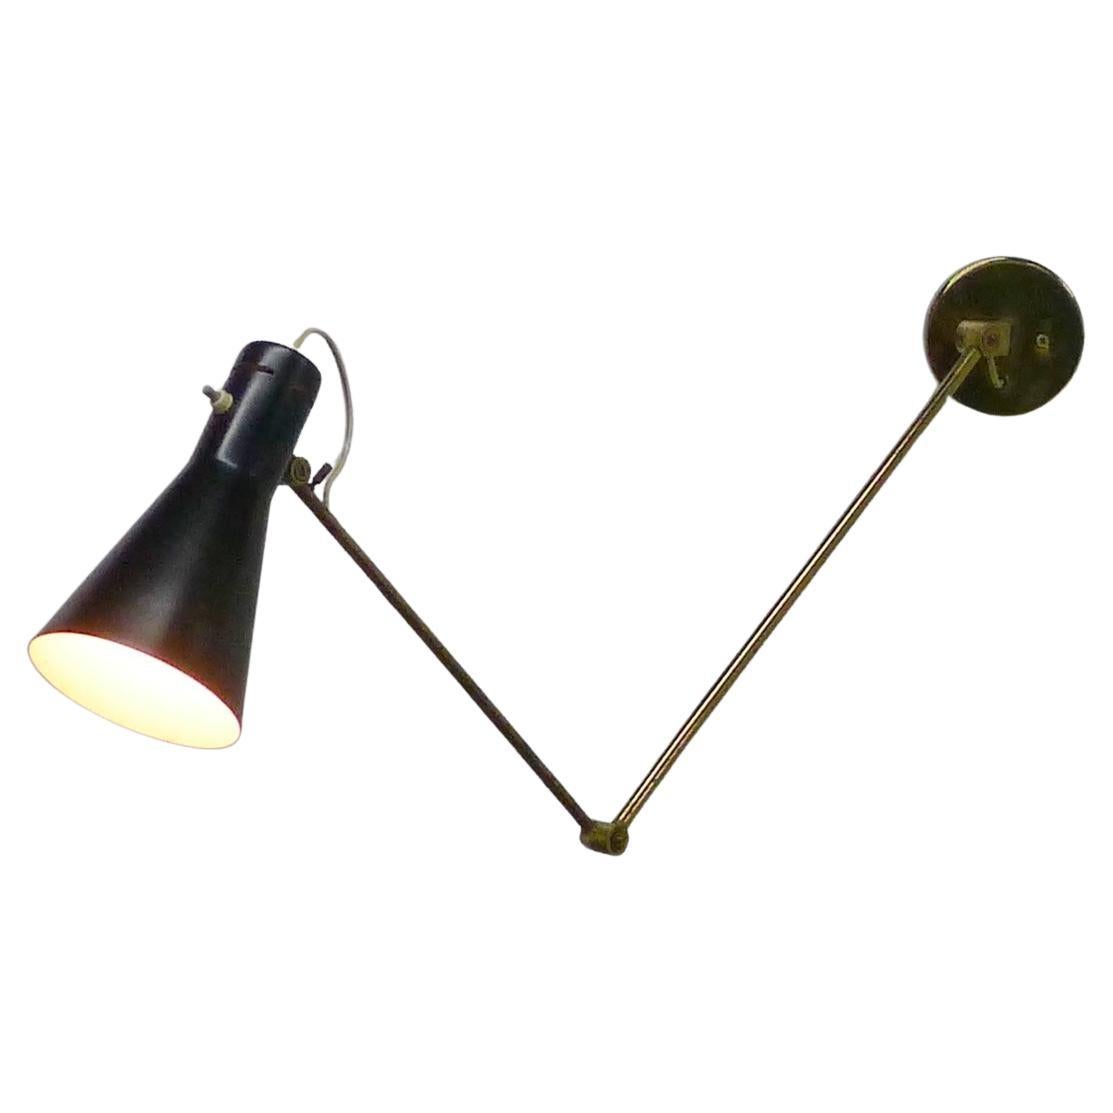 Vittoriano Vigano for Arteluce, Rare Articulated Wall Light, Italian 1950s For Sale